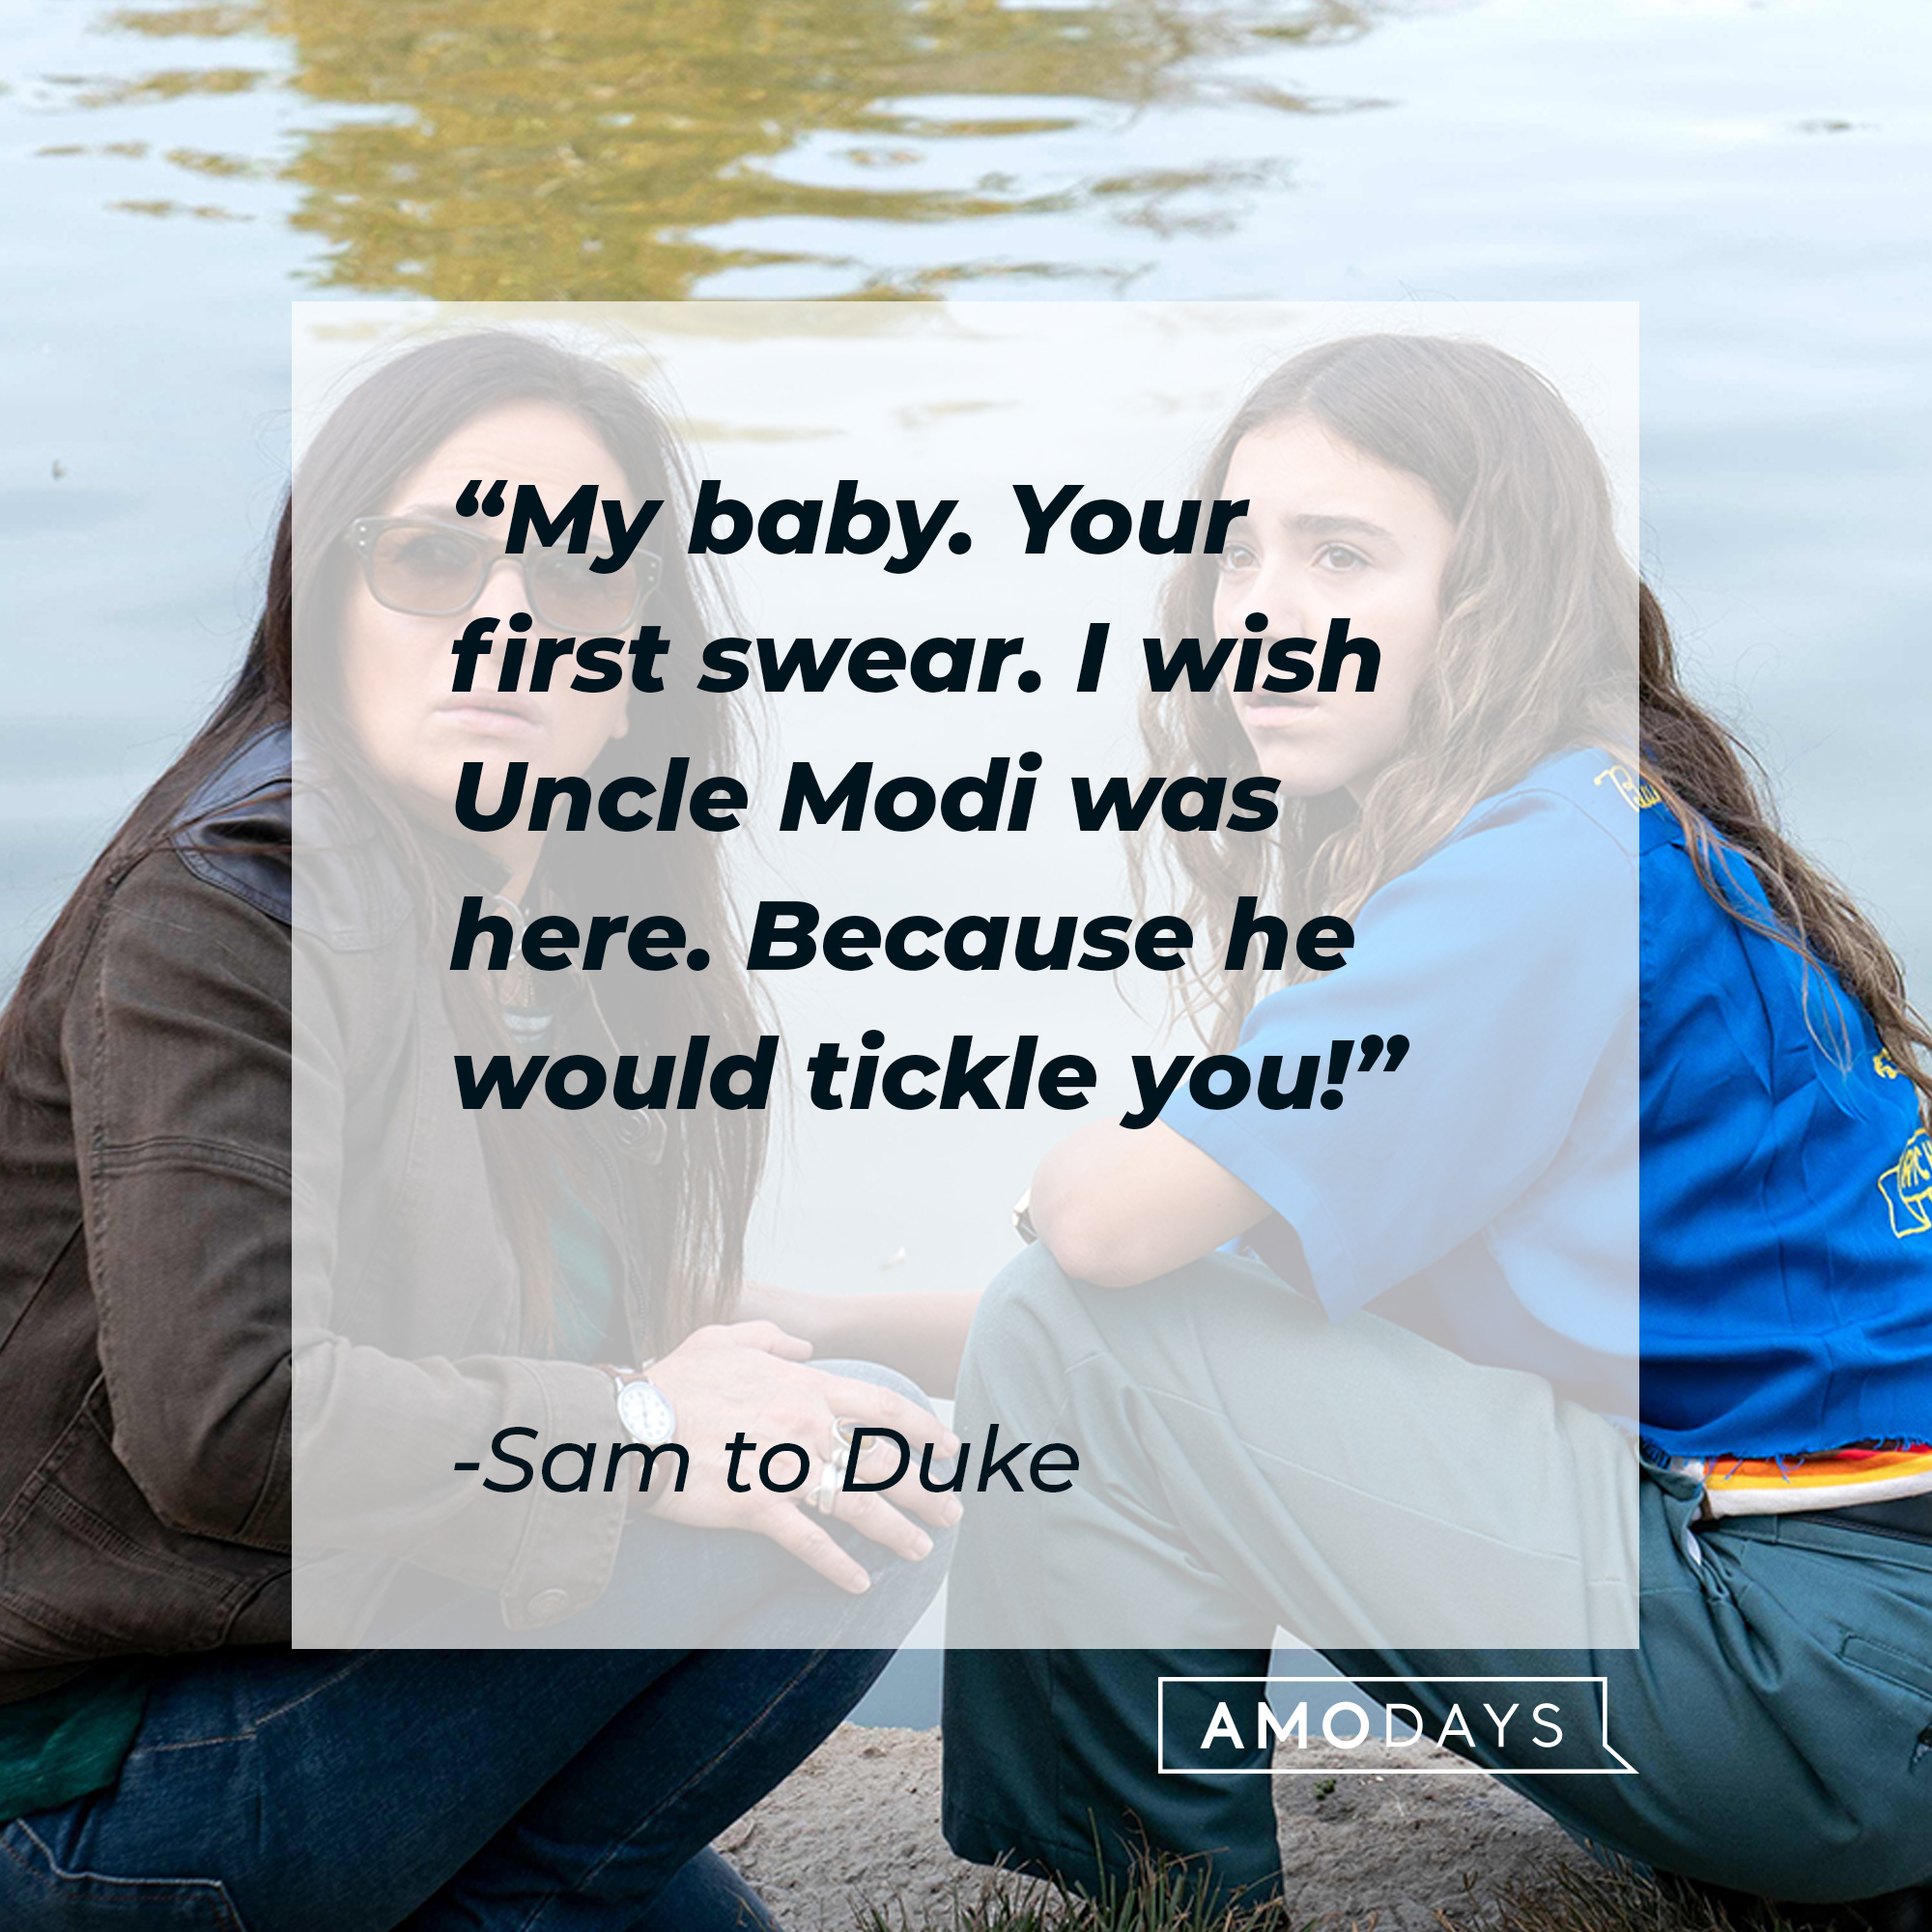 Sam's quote to Duke: "My baby. Your first swear. I wish Uncle Modi was here. Because he would tickle you!" | Source: facebook.com/BetterThingsFX